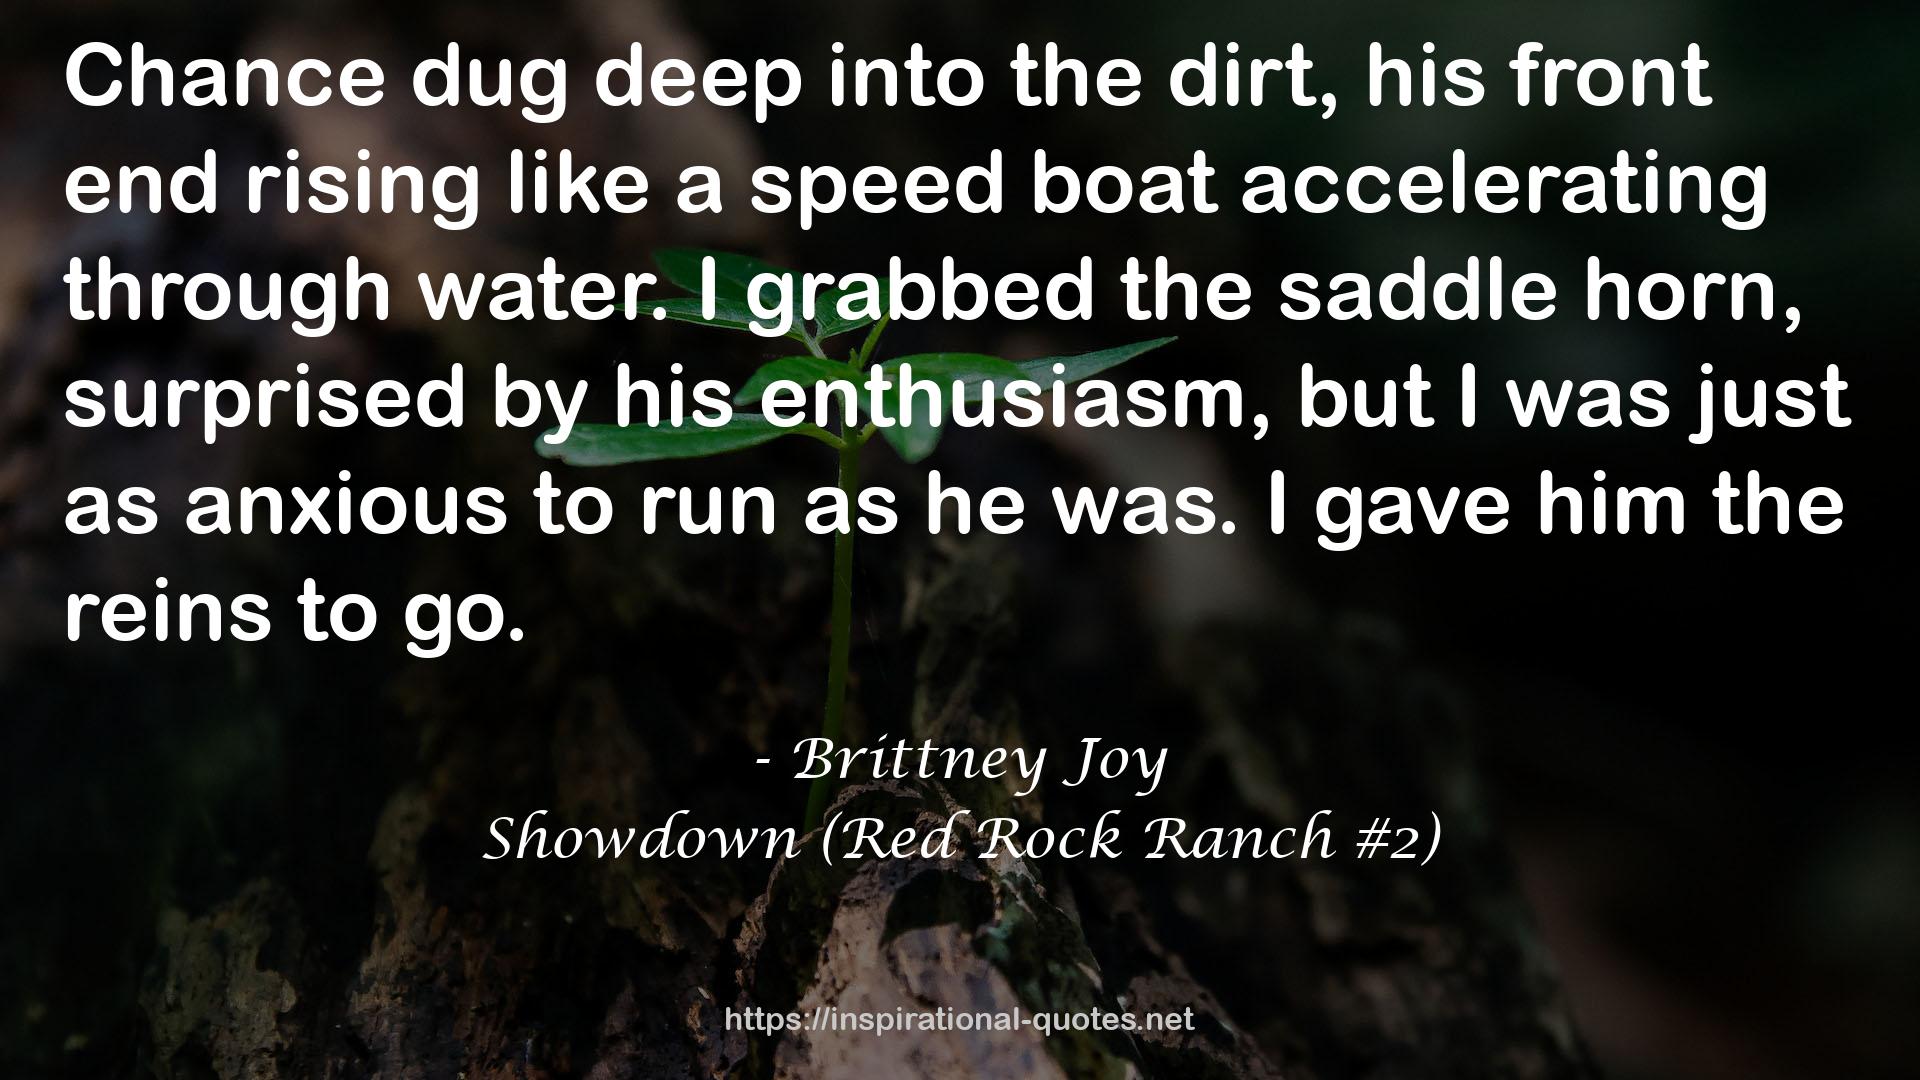 Showdown (Red Rock Ranch #2) QUOTES